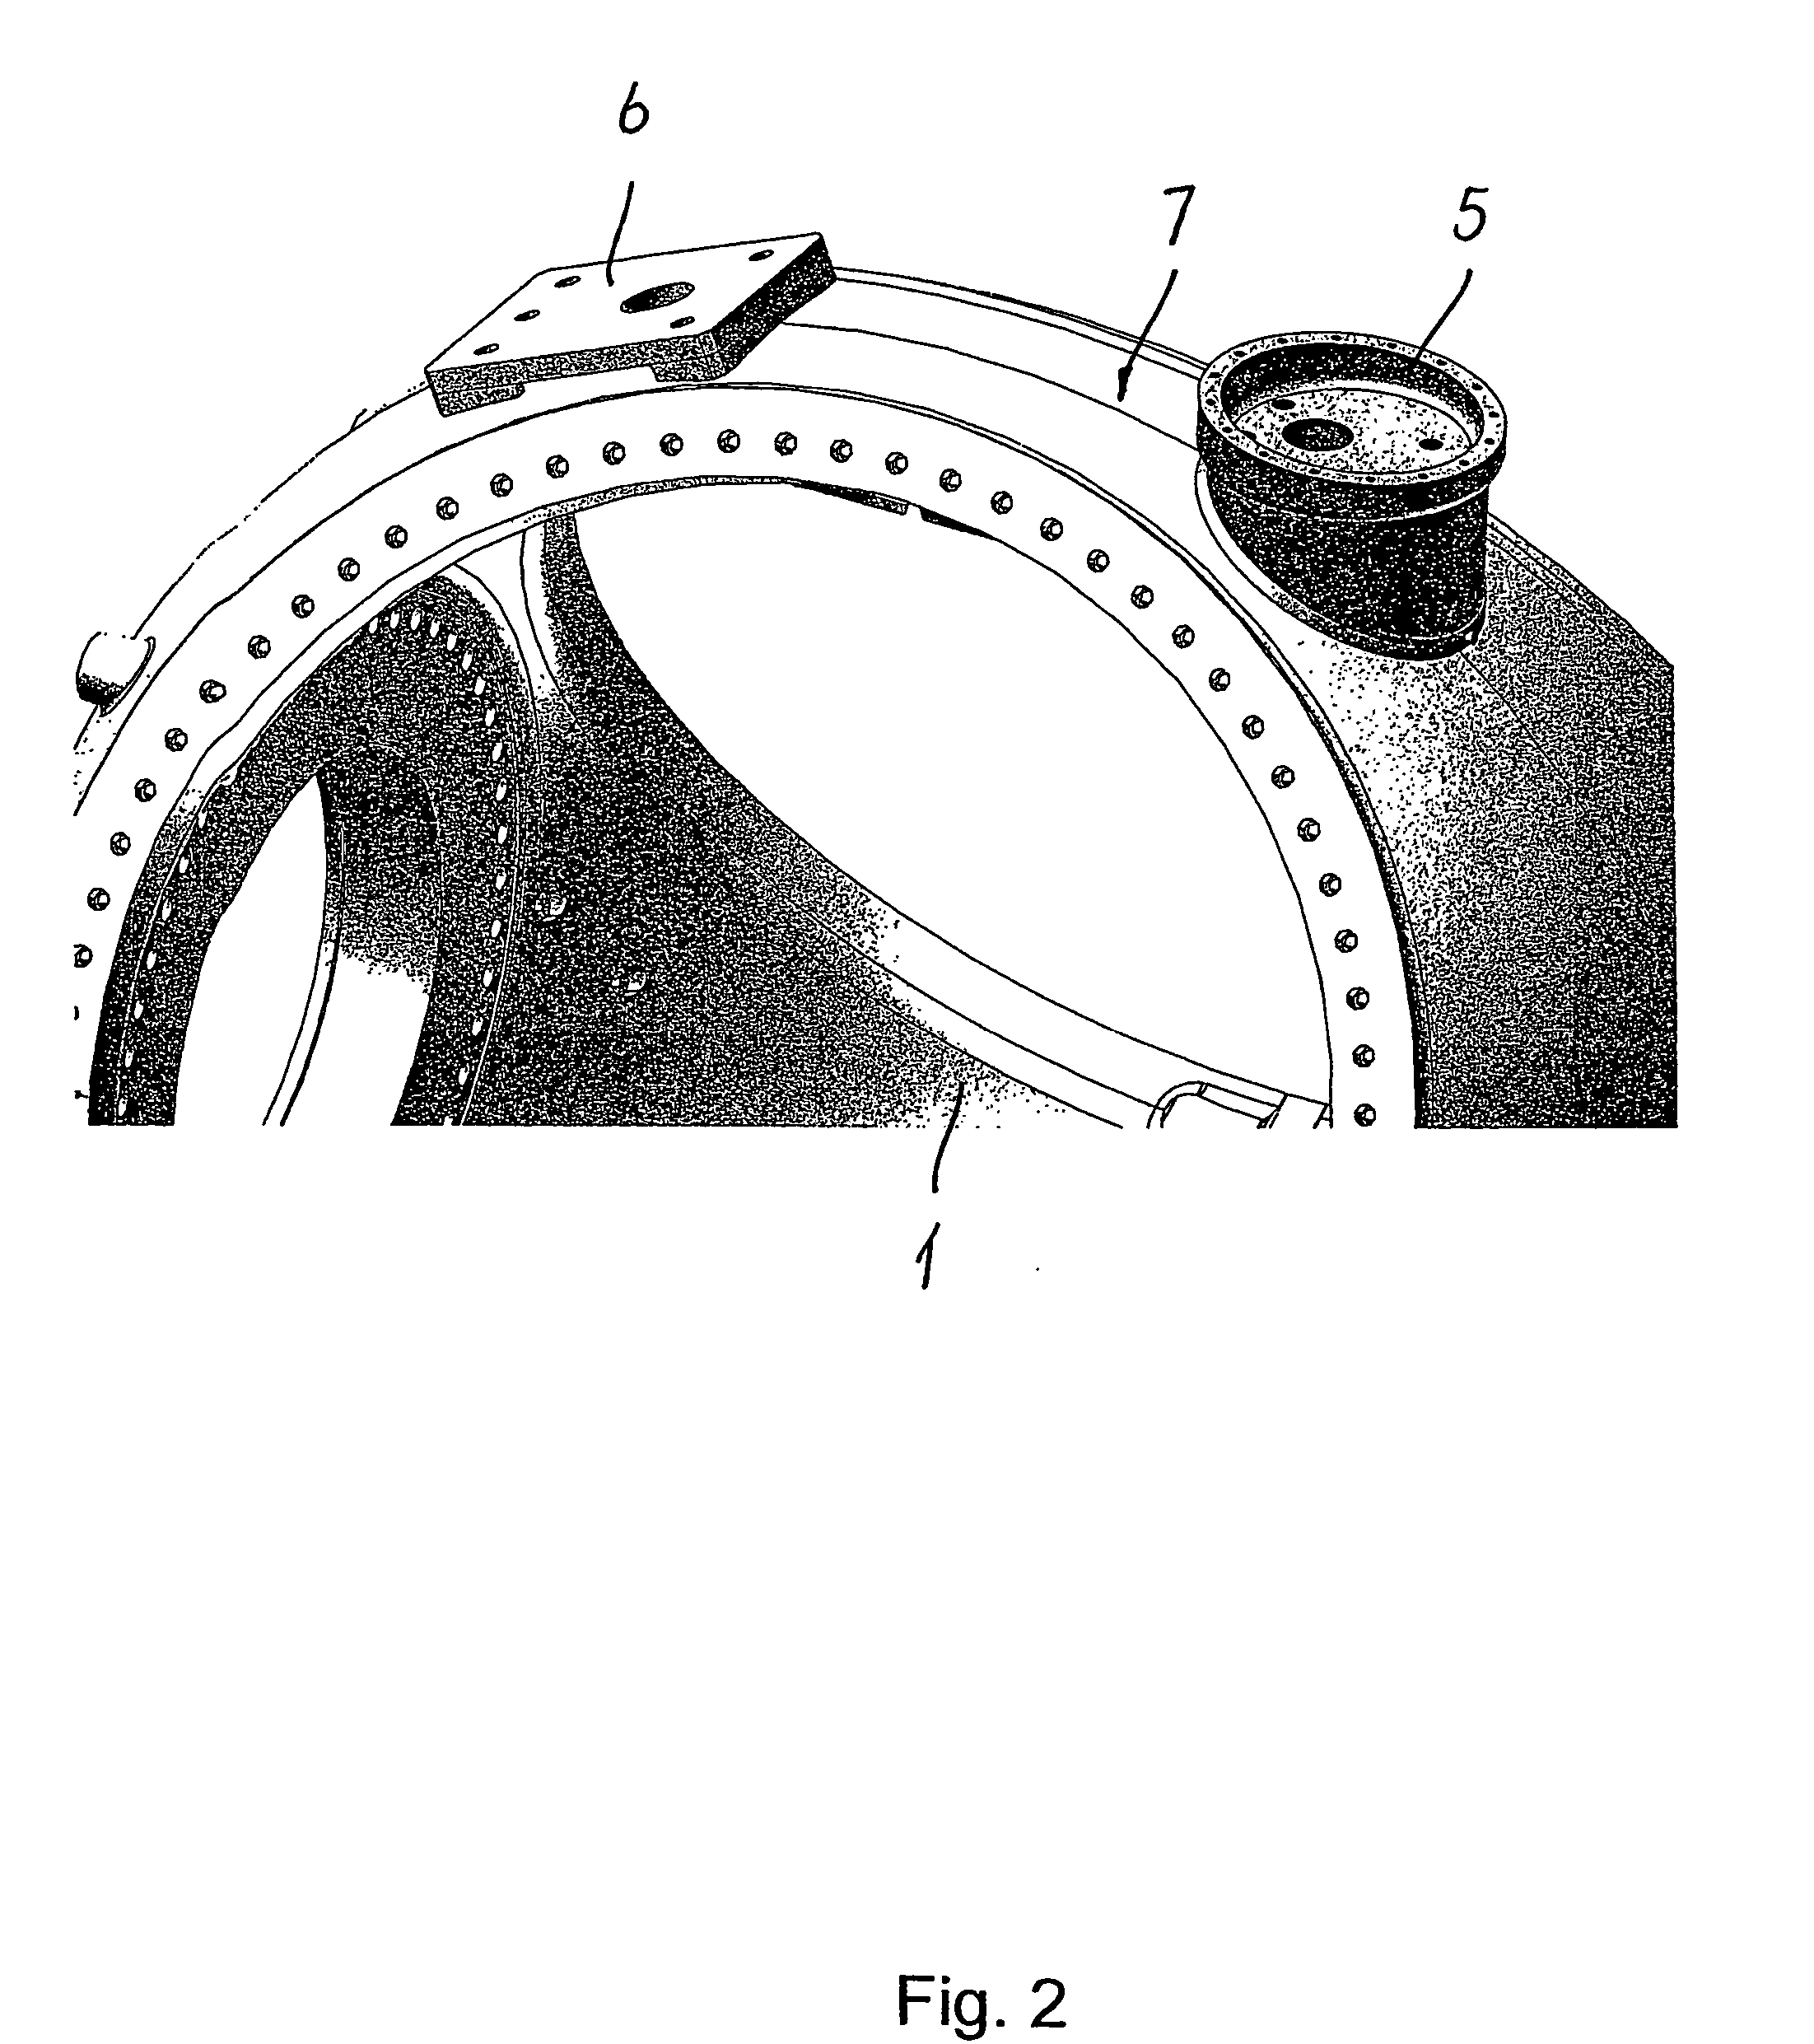 Method of Conducting Service on a Wind Turbine Using Equipment Mounted on the Hub